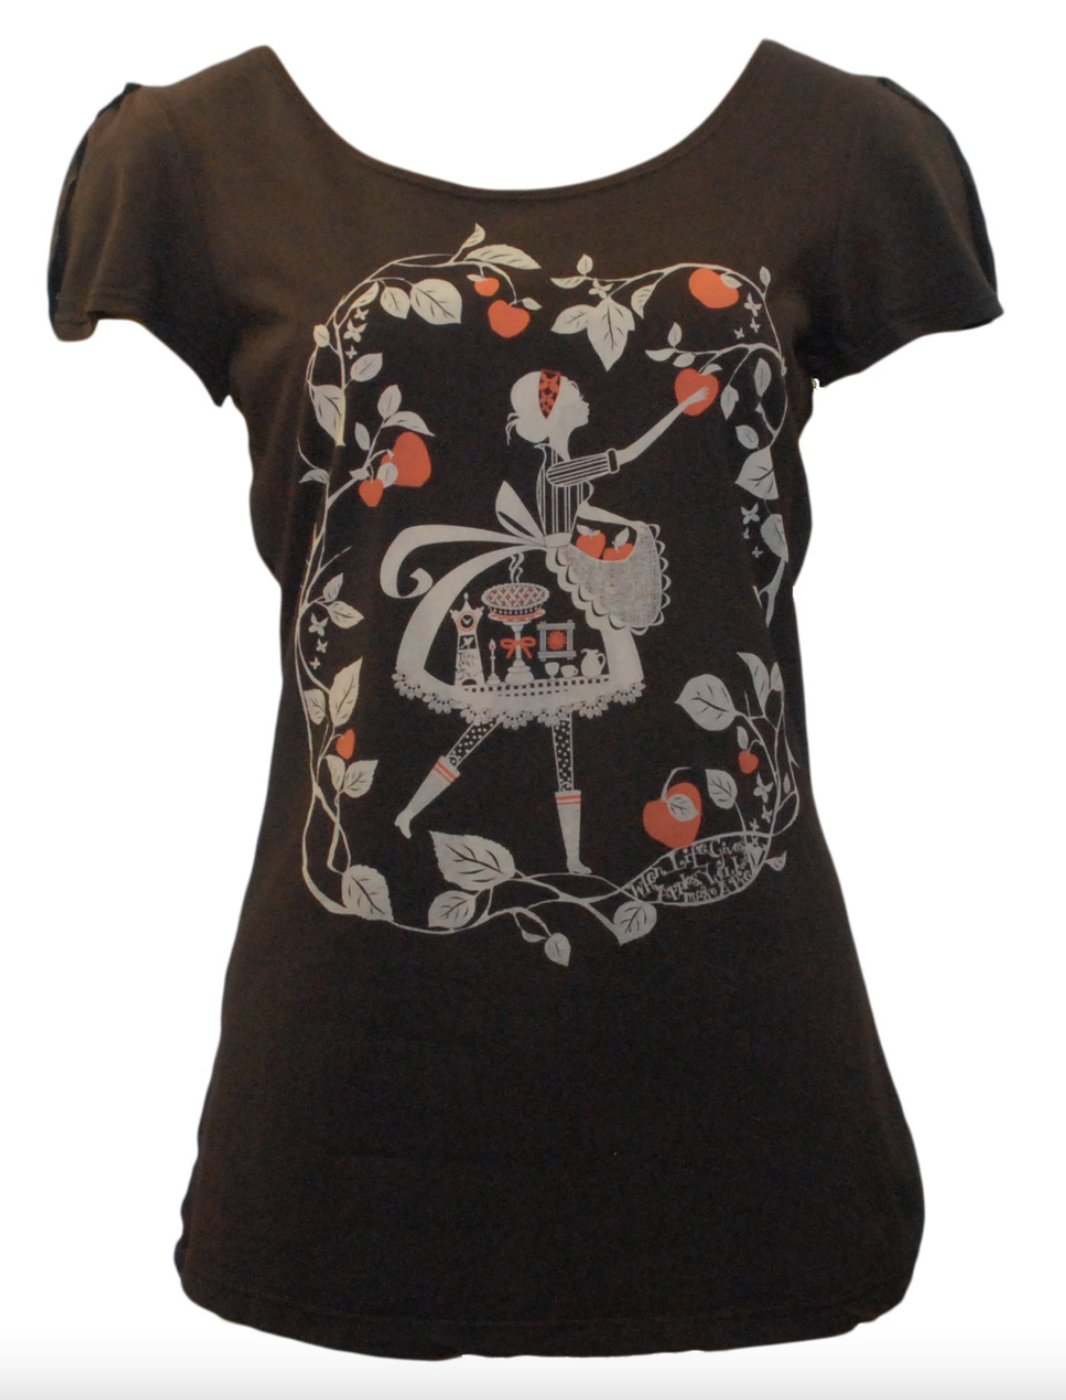 Dark brown graphic tee of apple picker girl with overlapping tulip sleeves